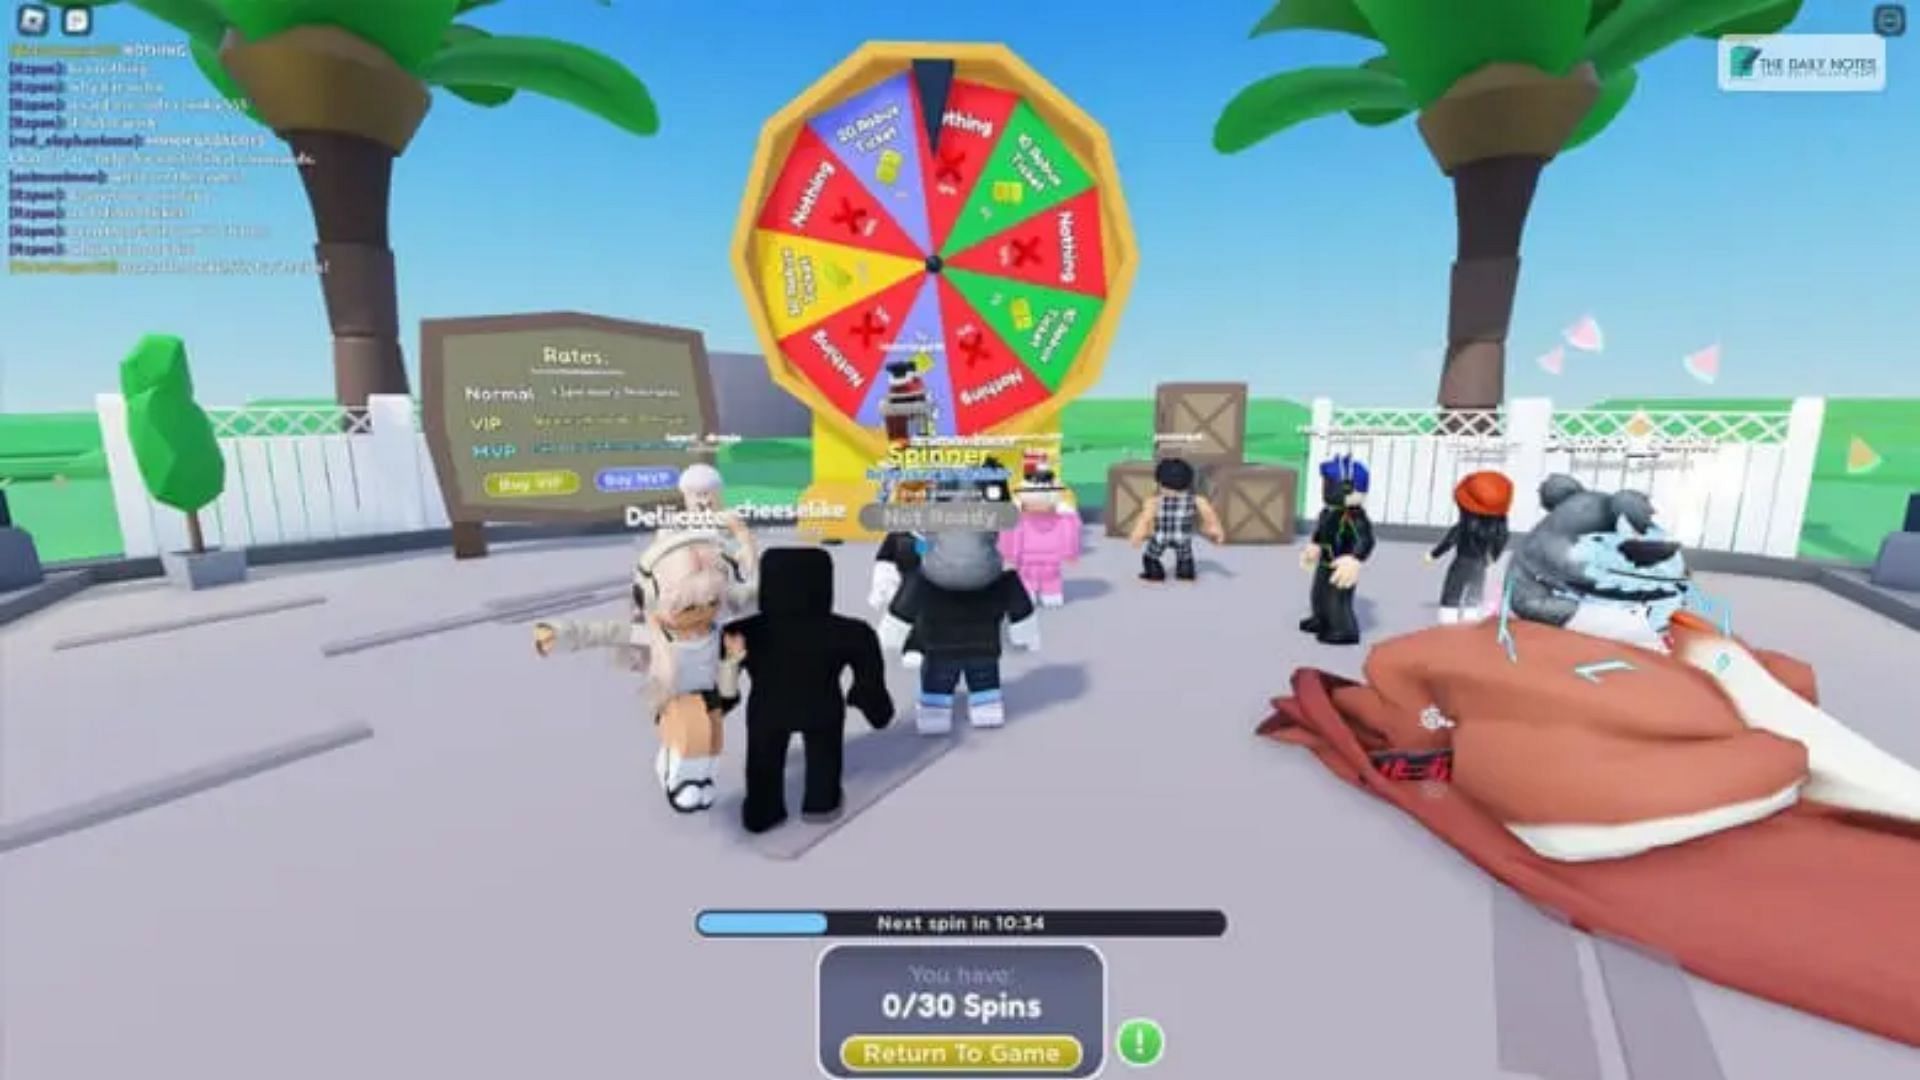 Gameplay cover for Double Down (Image via Roblox)